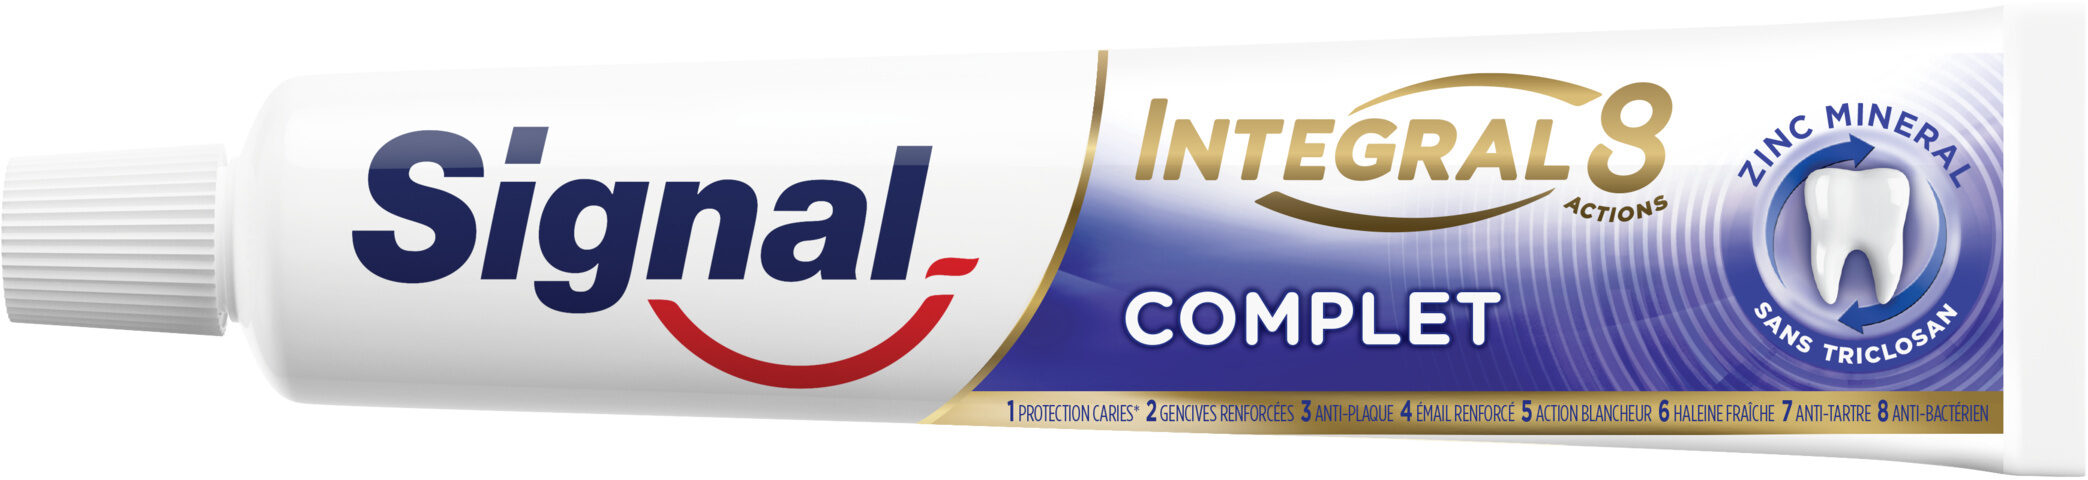 Signal Dentifrice Complet Integral 8 450ml - Produkto - fr